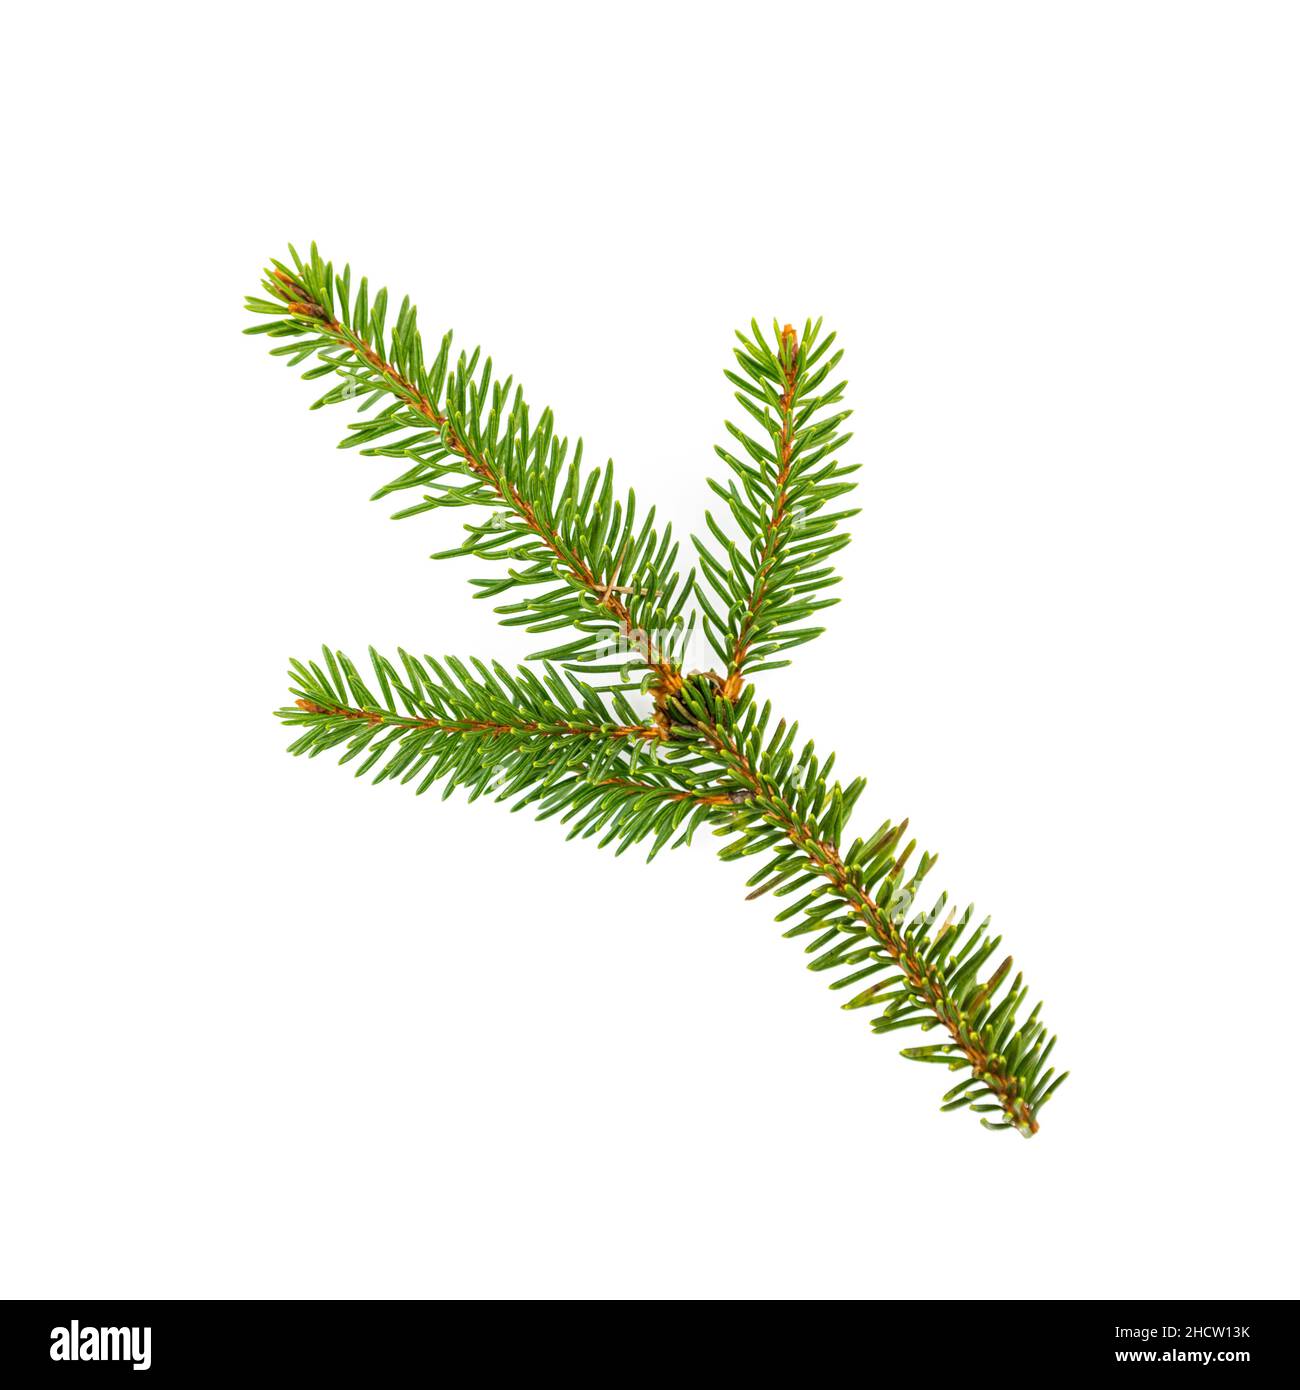 Branch of fir tree on white background Stock Photo